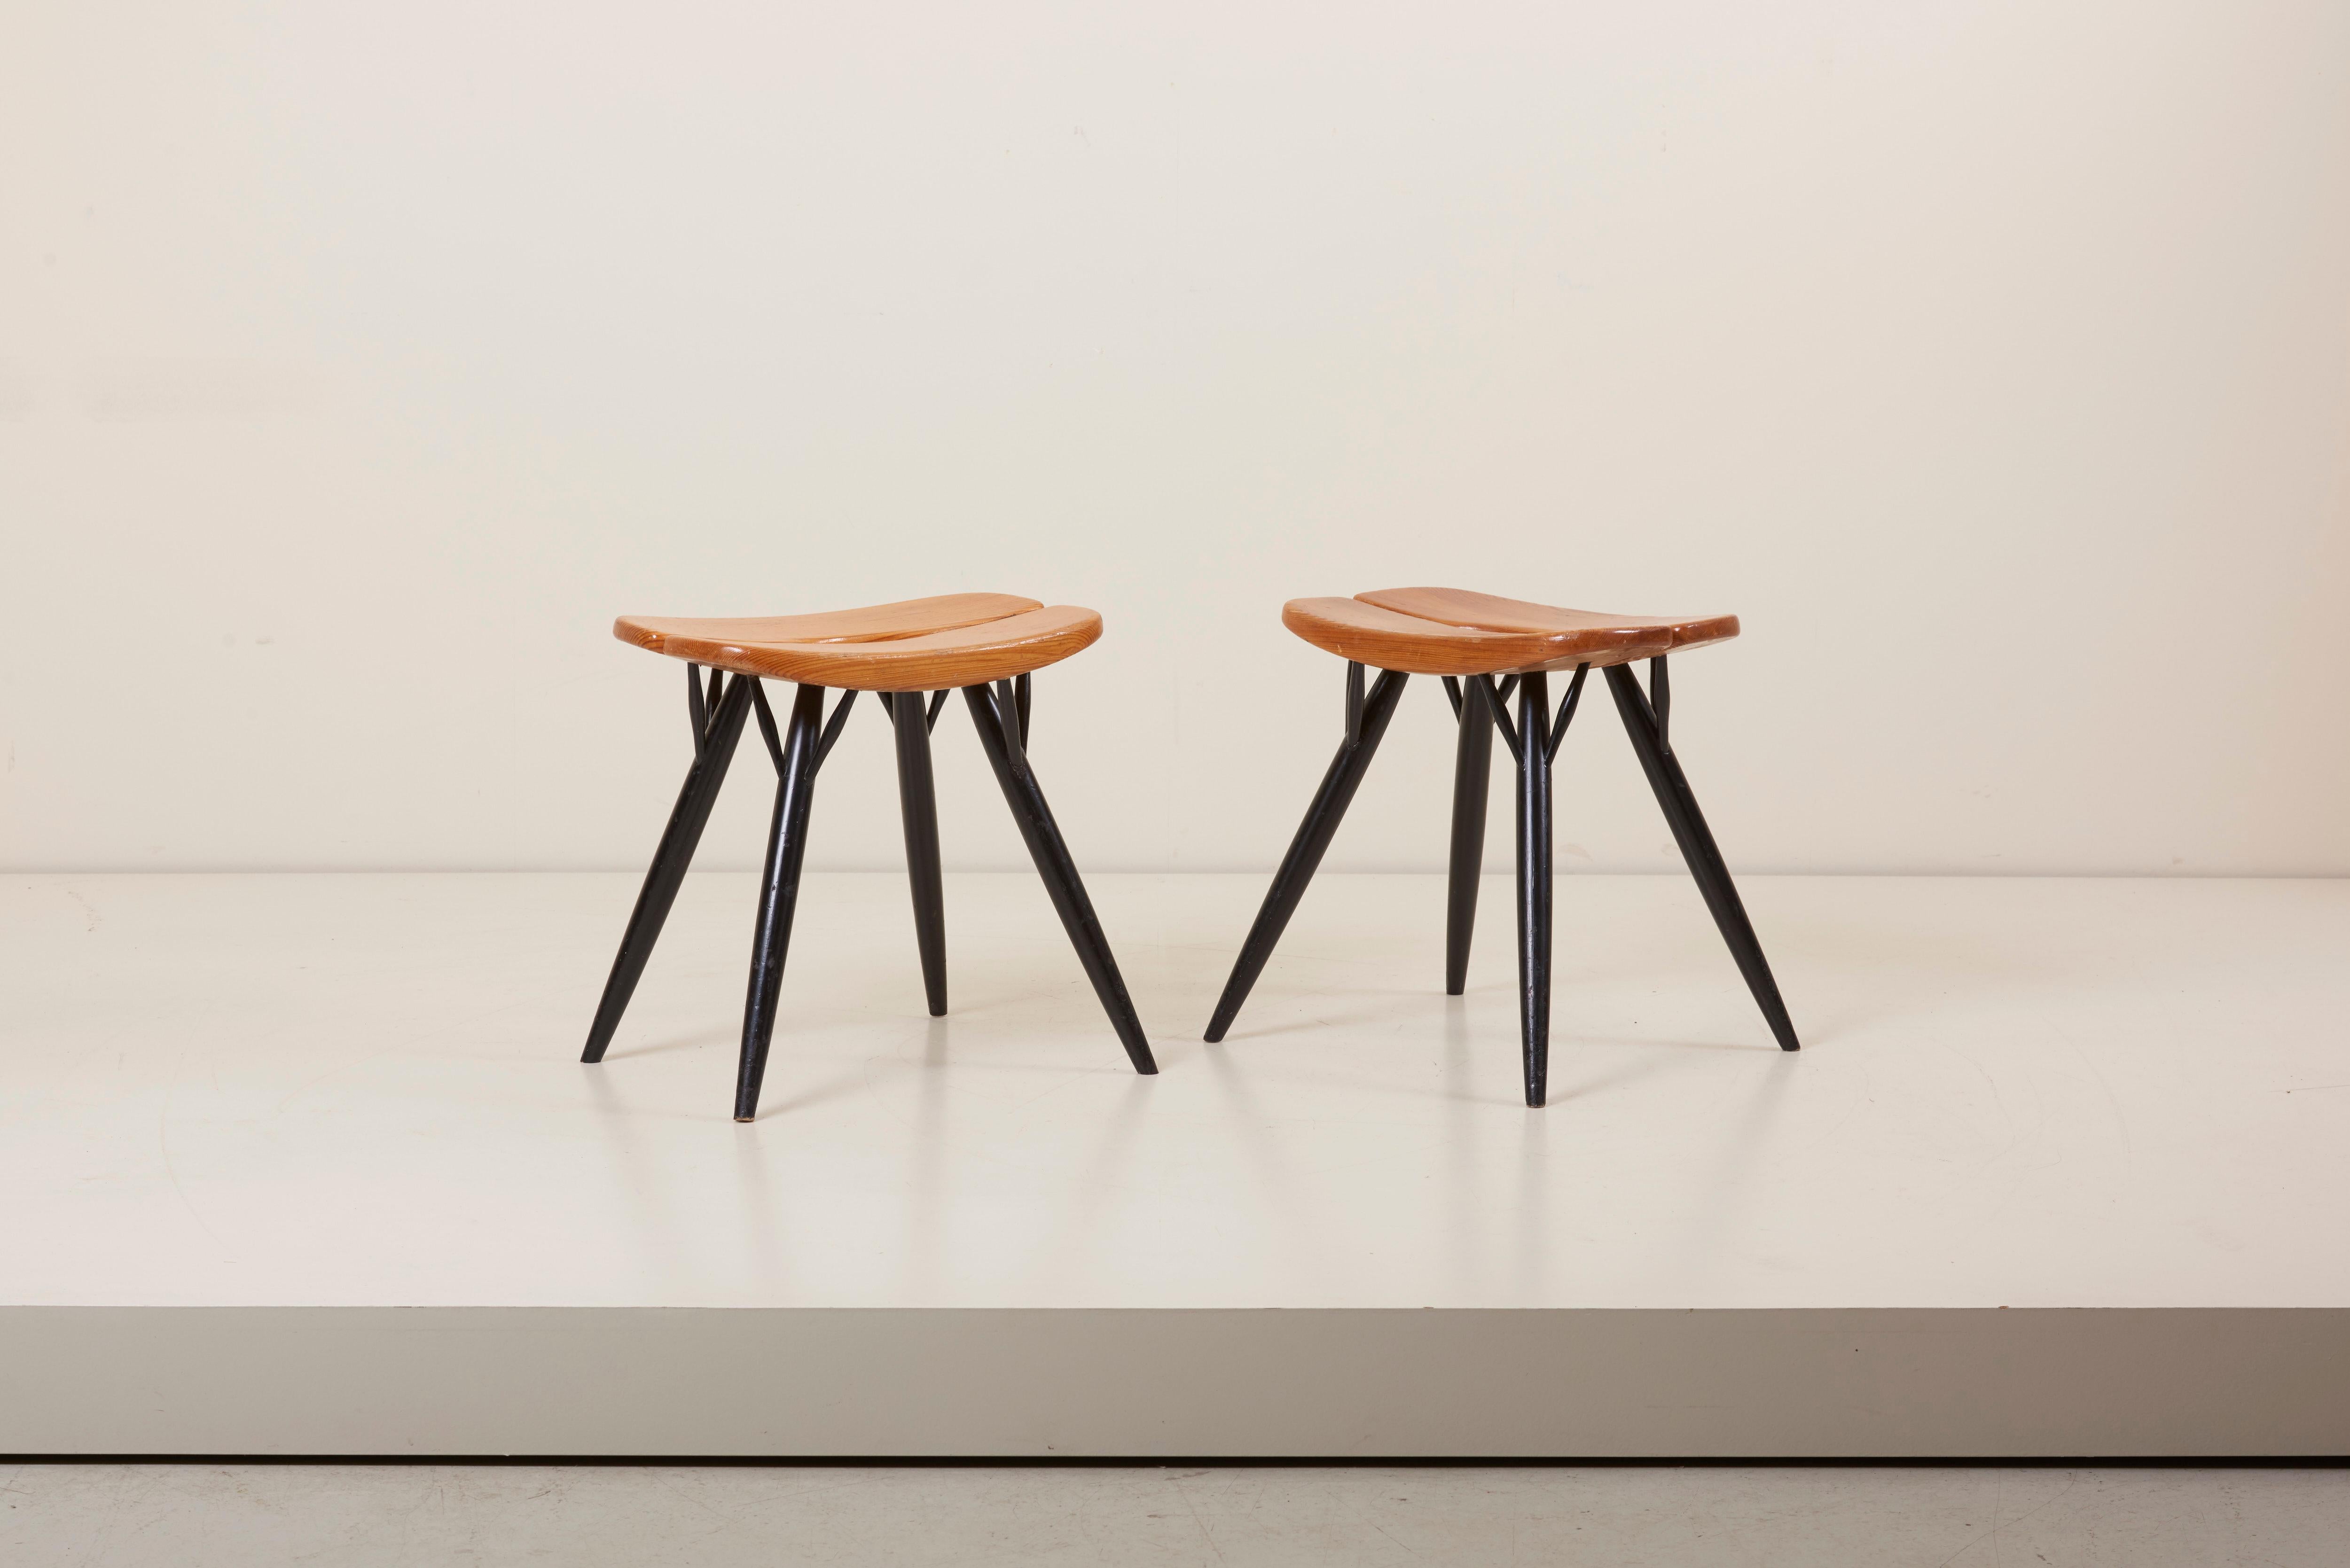 Ilmari Tapiovaara designed the Pirkka stool in the 1950s. The black legs and seats in pine result in a timeless finnish design. This Pirkka stools are made by Laukaan Puu in the 1950s.